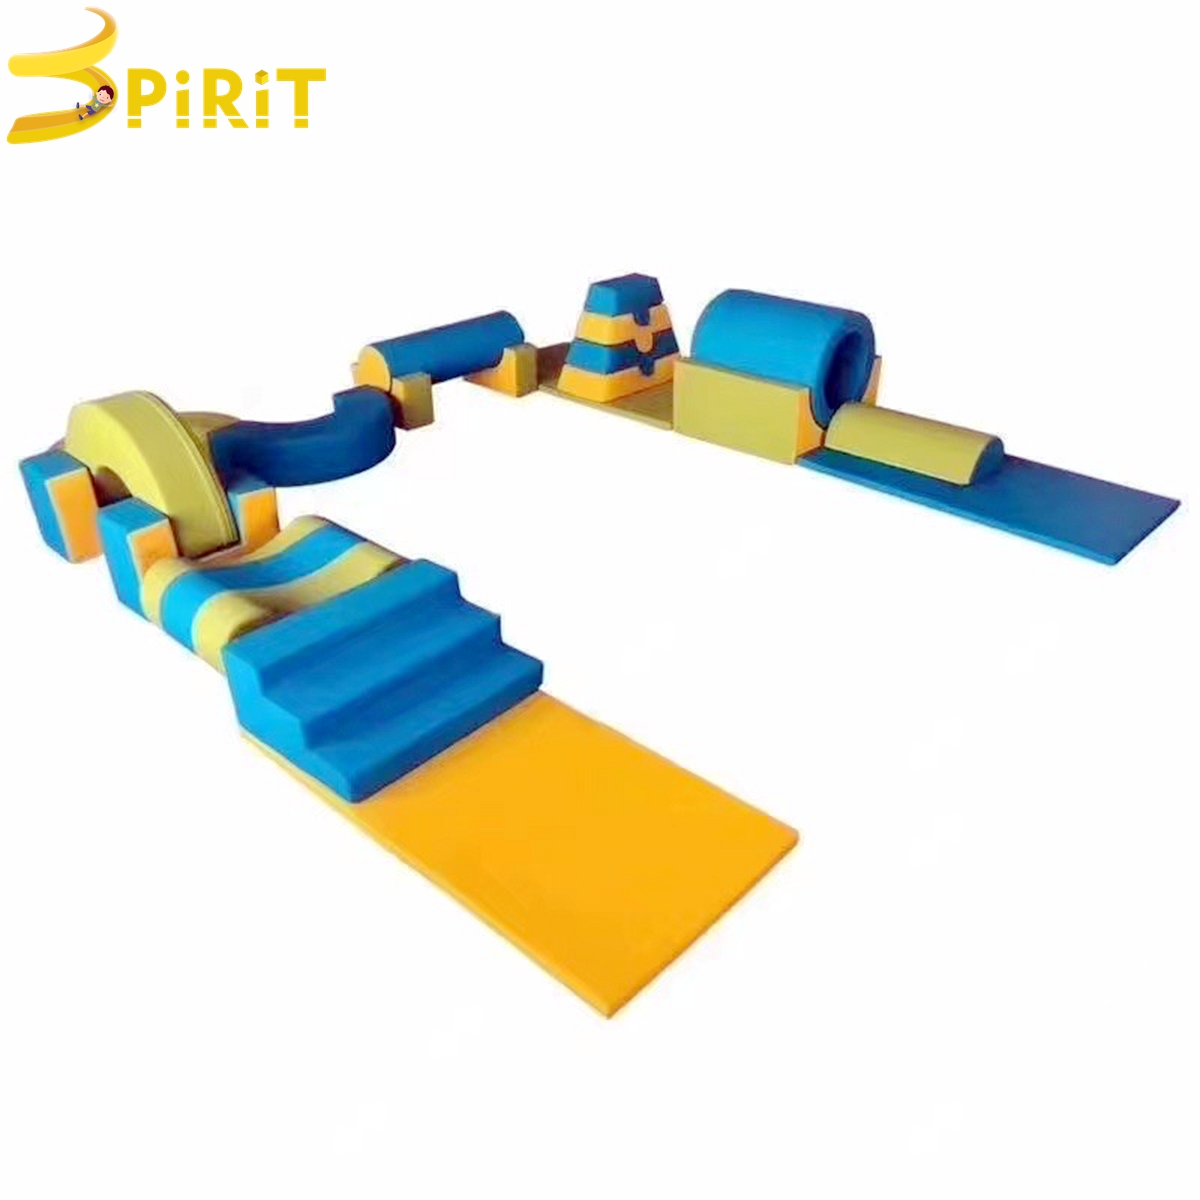 Fun toddler soft play area equipment with crawl at home.-SPIRIT PLAY,Outdoor Playground, Indoor Playground,Trampoline Park,Outdoor Fitness,Inflatable,Soft Playground,Ninja Warrior,Trampoline Park,Playground Structure,Play Structure,Outdoor Fitness,Water Park,Play System,Freestanding,Interactive,independente ,Inklusibo, Park, Pagsaka sa Bungbong, Dula sa Bata